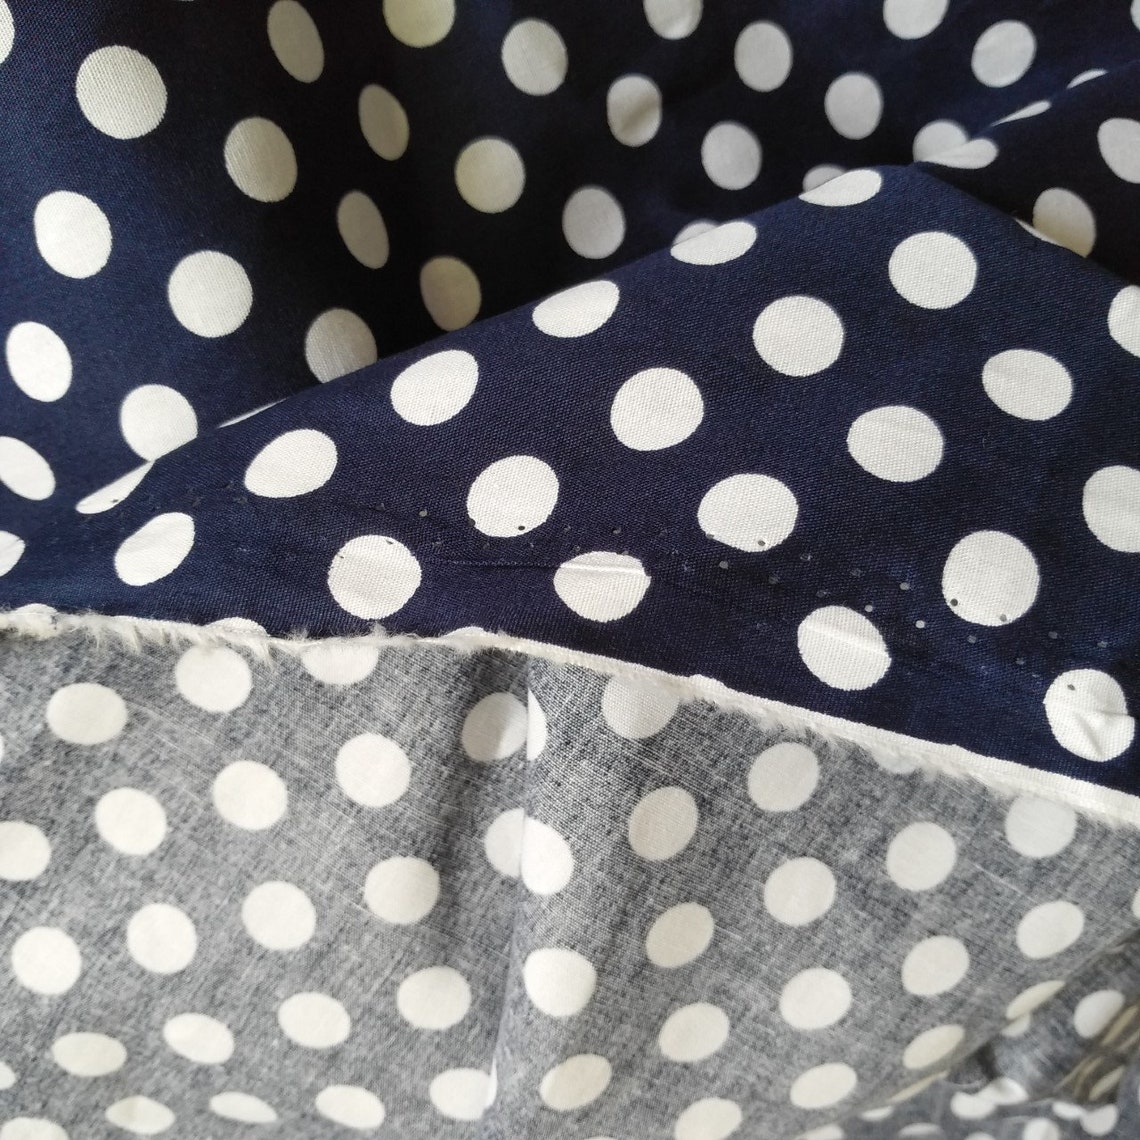 Navy Blue White Polka Dots 100% Cotton Fabric by the Yard | Etsy